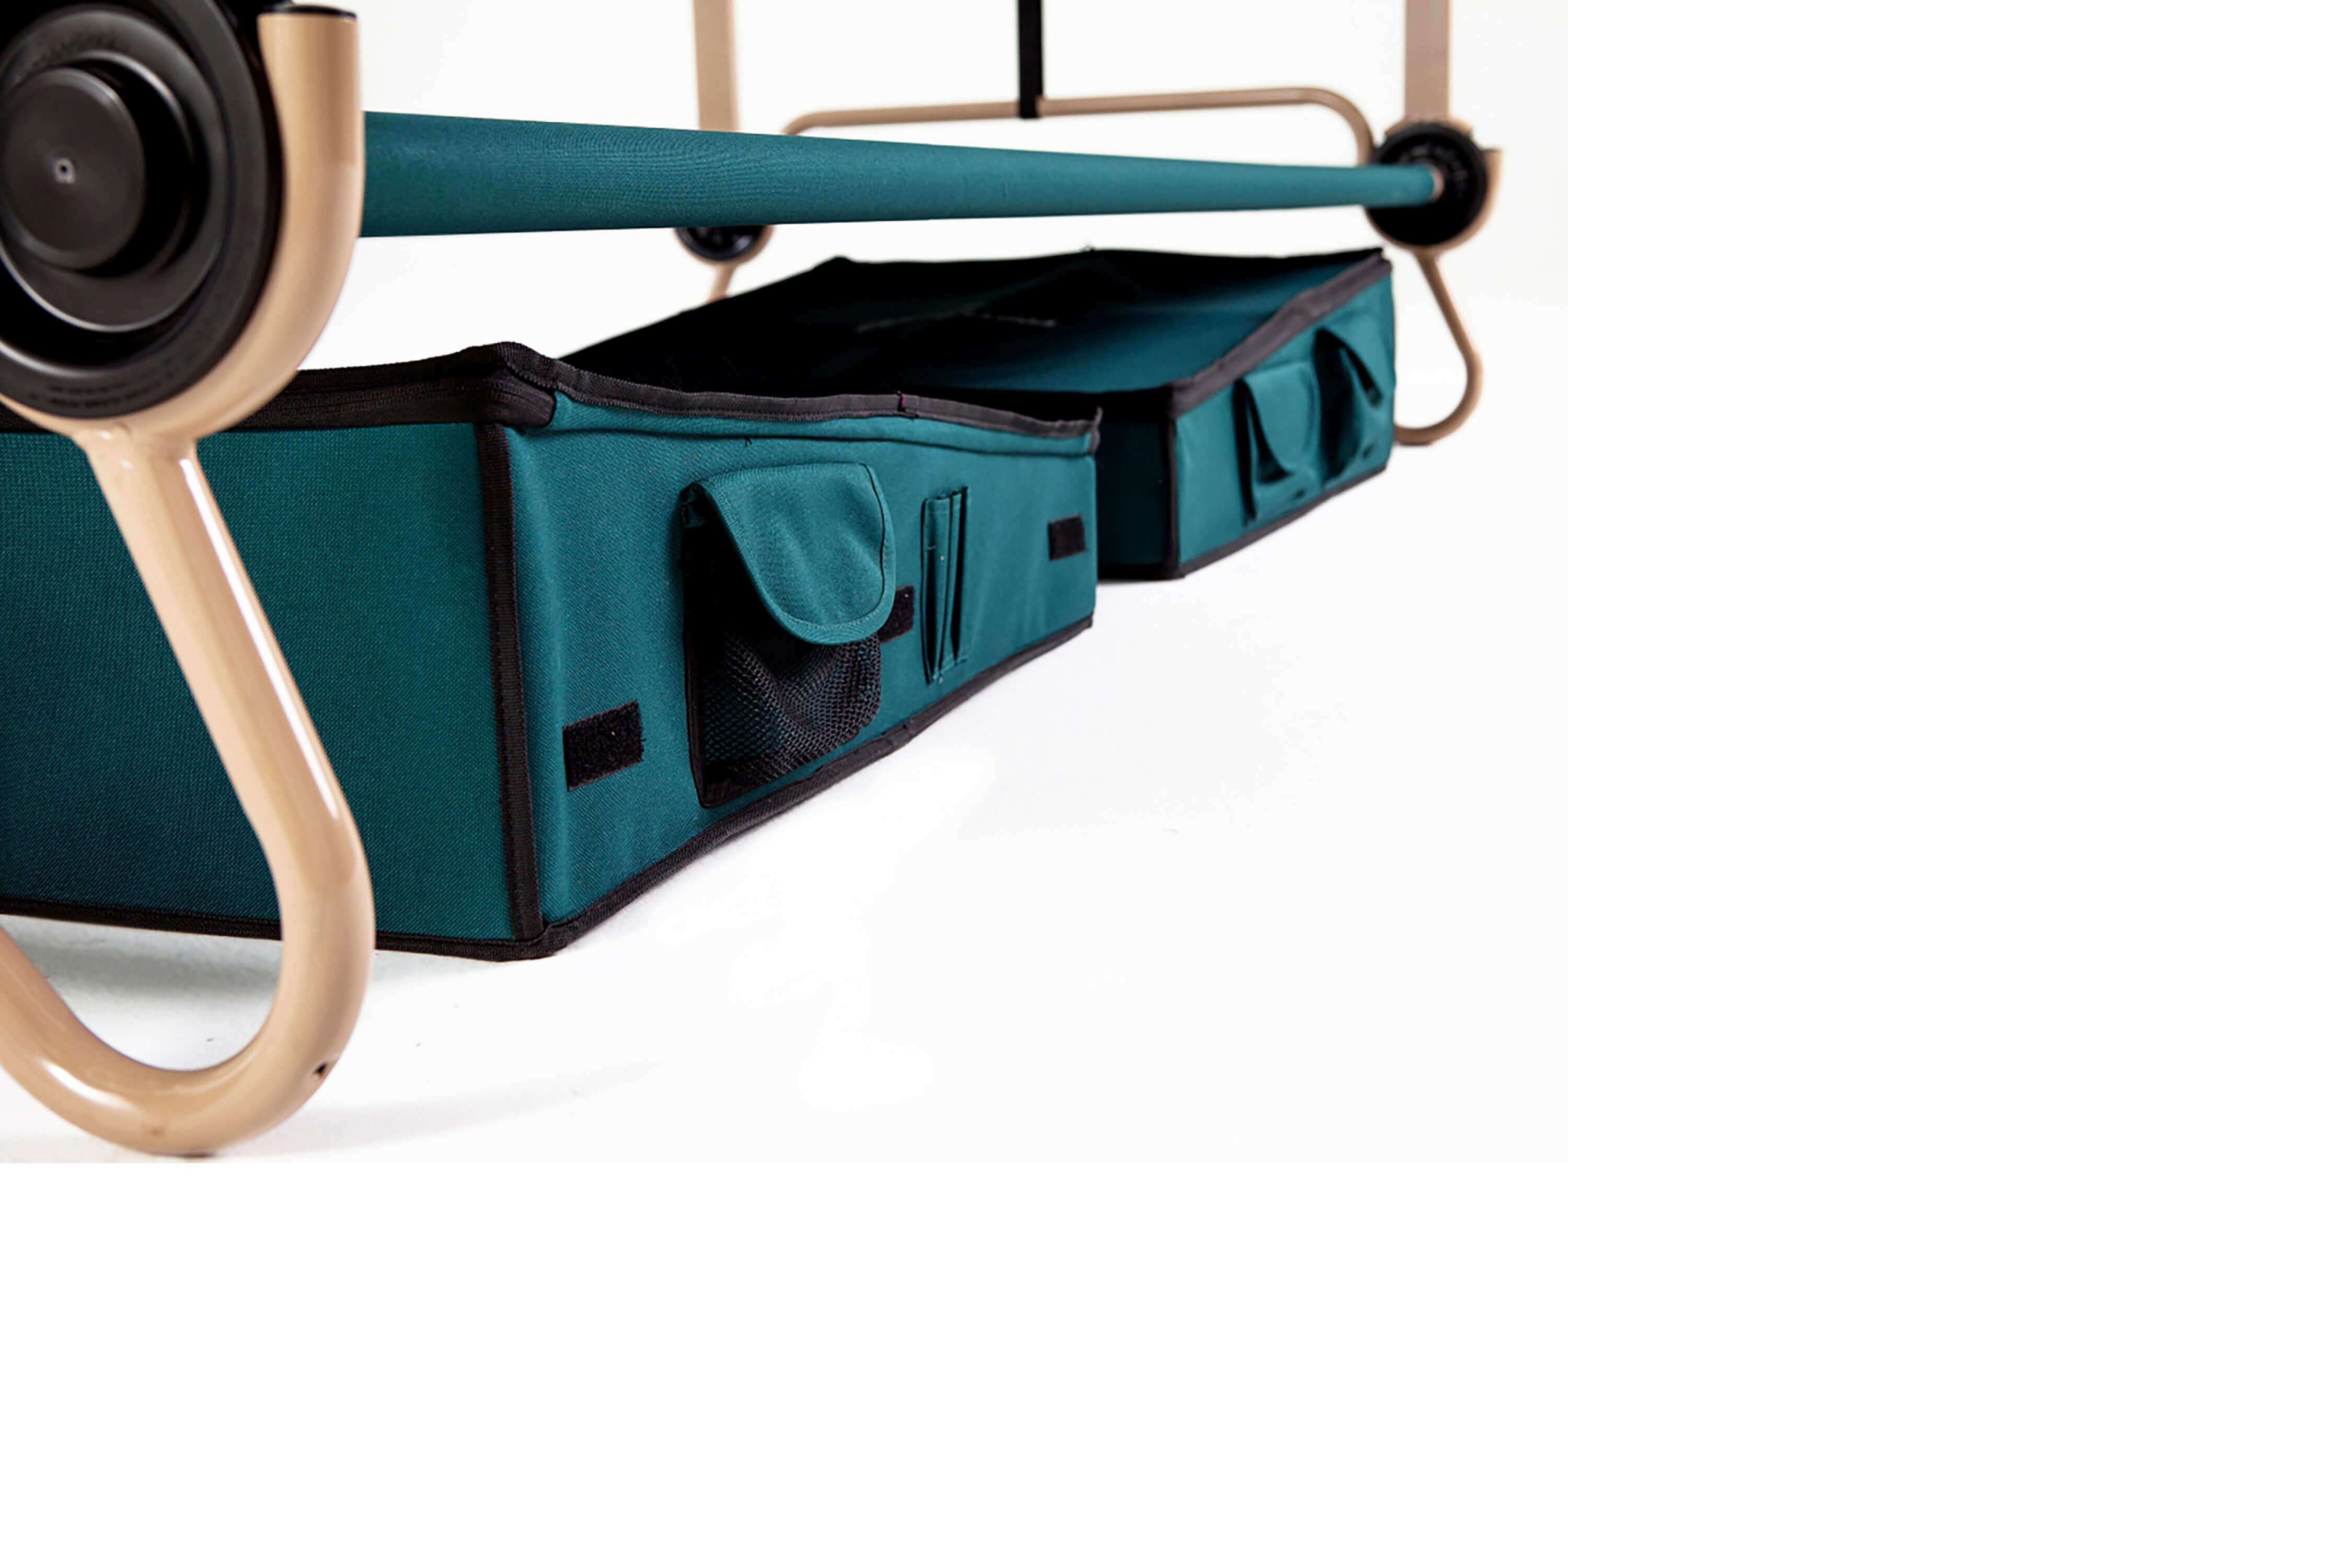 Folding camping bed side view